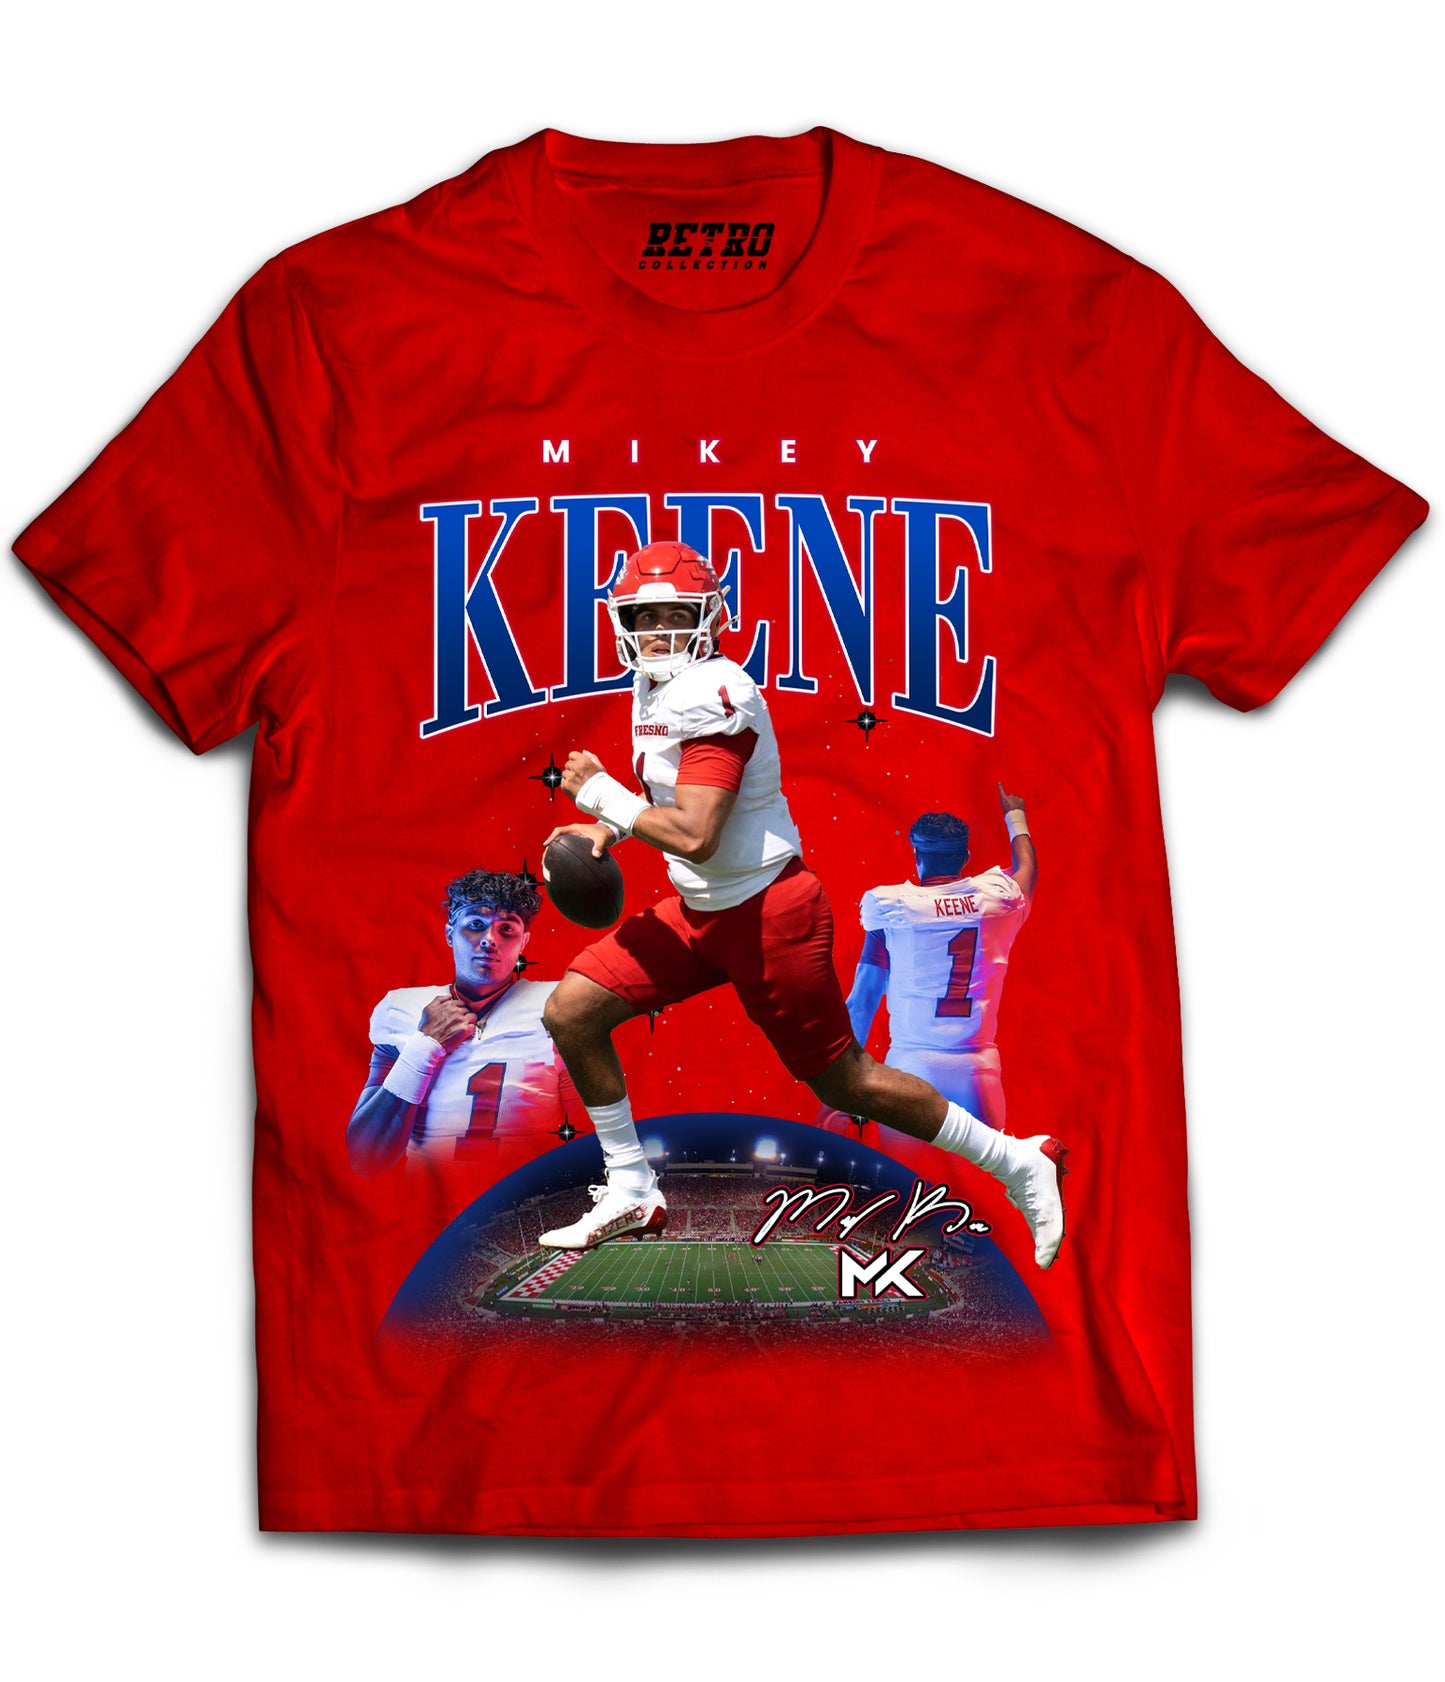 Mikey Keene "Universe" Tribute Shirt *LIMITED EDITION* (Black, Red, White)